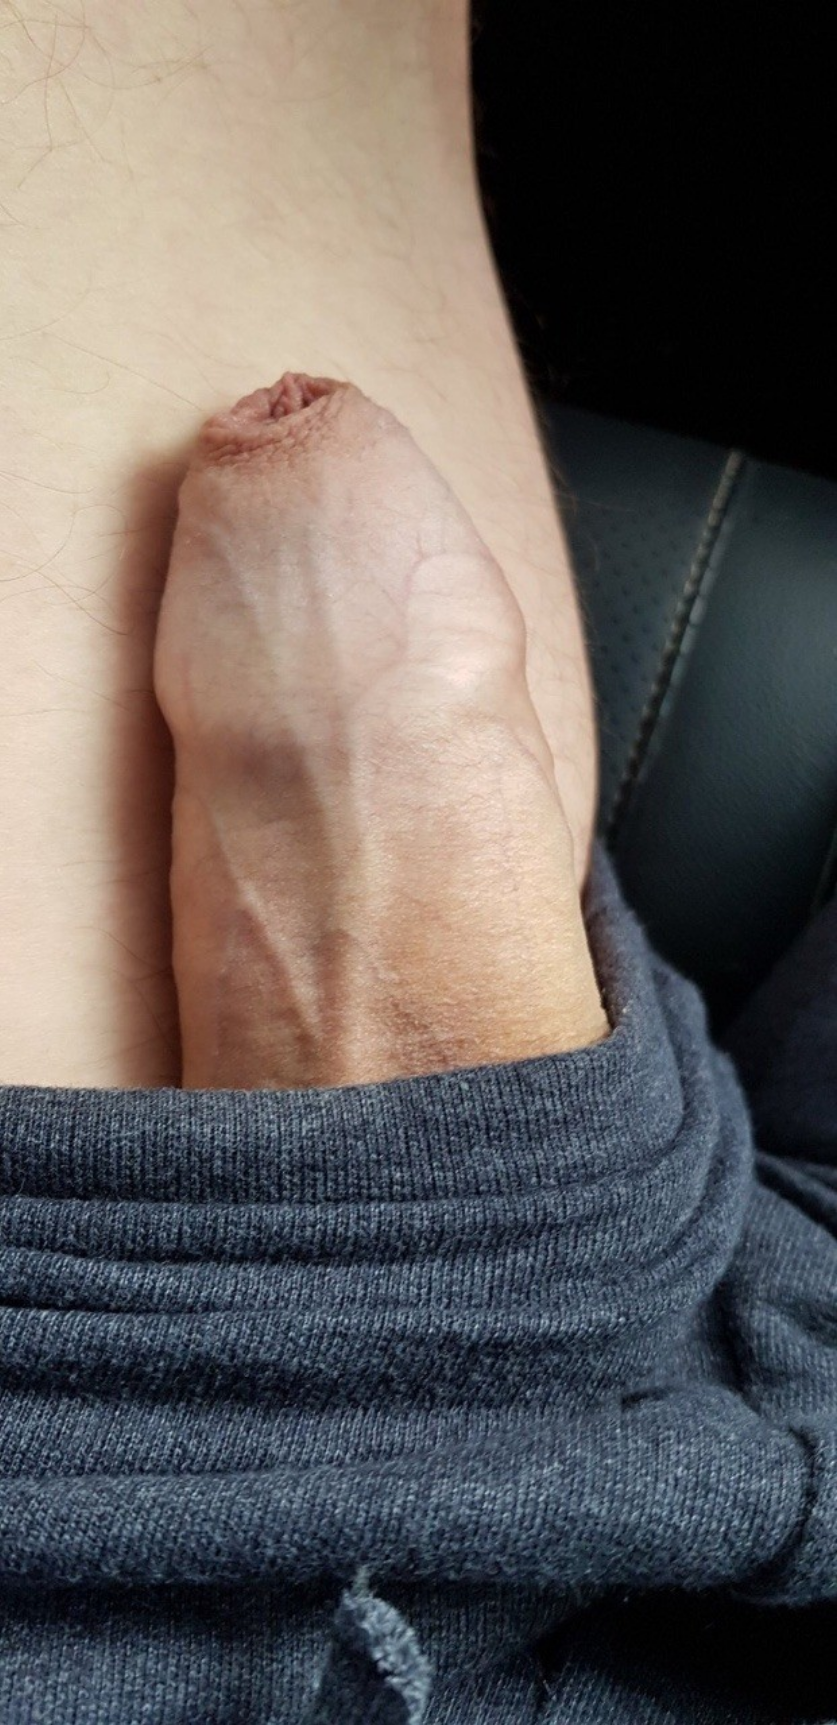 Photo by Musclephuk with the username @Musclephuk,  April 9, 2020 at 11:15 AM. The post is about the topic CurvedDownCock and the text says 'Nude NSFW (Adult Content) #muscle #hairy #curvedcock #bigcock #hugecock #cum #breed #fuck #bumped #tina #dick #bigdick #harddick #cock #bareback #creampie #musclephuk #curveddowncock'